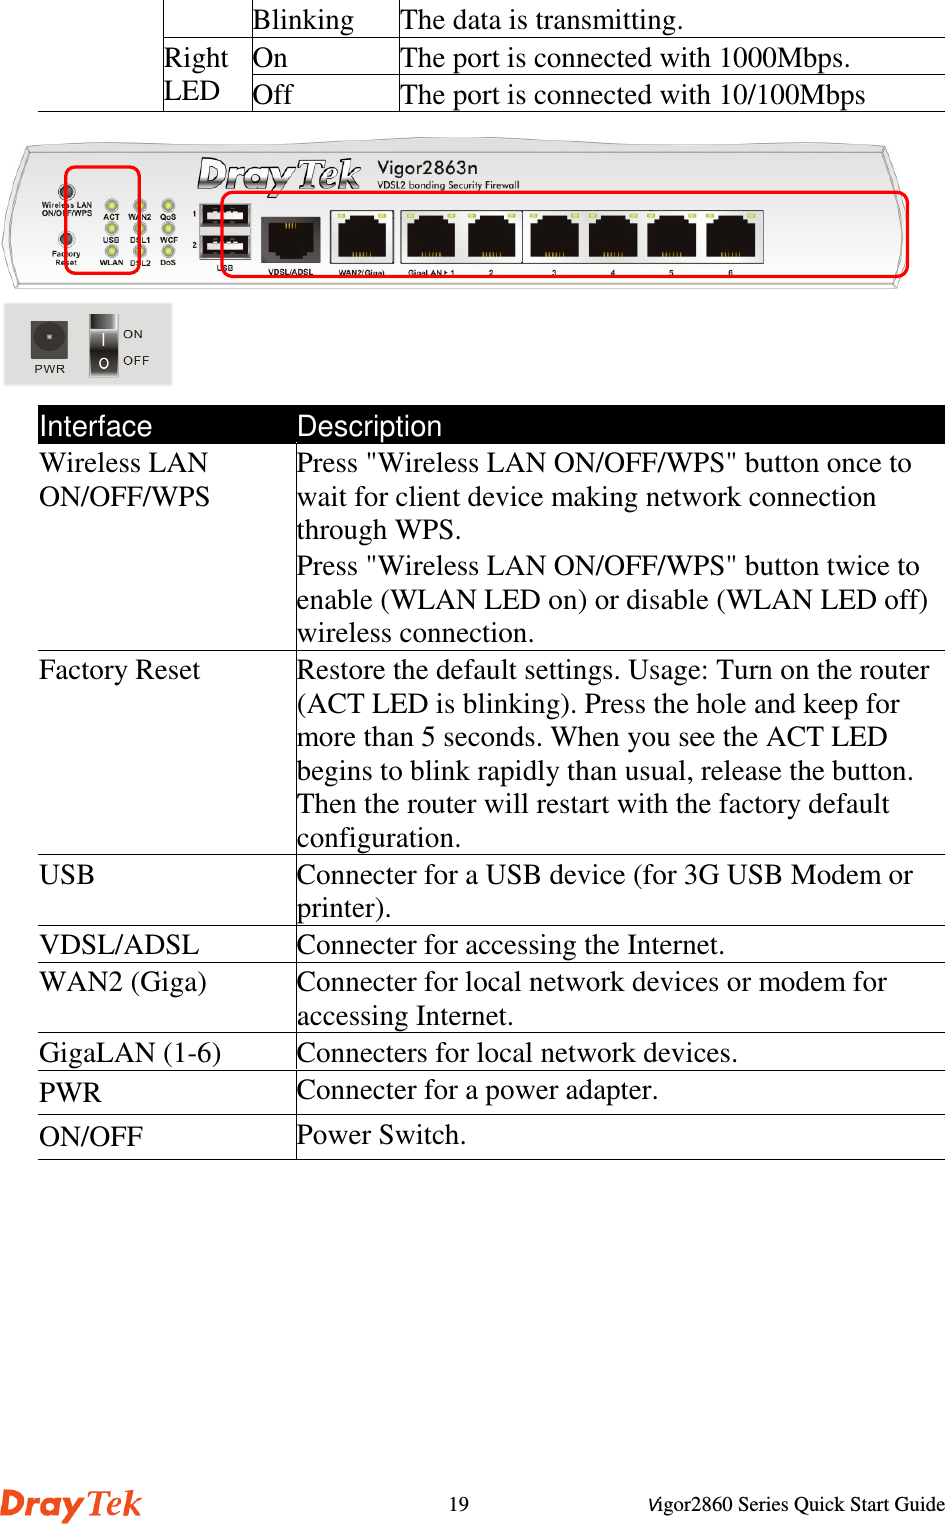 Vigor2860 Series Quick Start Guide19Blinking The data is transmitting.On The port is connected with 1000Mbps.RightLED Off The port is connected with 10/100MbpsInterface DescriptionWireless LANON/OFF/WPSPress &quot;Wireless LAN ON/OFF/WPS&quot; button once towait for client device making network connectionthrough WPS.Press &quot;Wireless LAN ON/OFF/WPS&quot; button twice toenable (WLAN LED on) or disable (WLAN LED off)wireless connection.Factory Reset Restore the default settings. Usage: Turn on the router(ACT LED is blinking). Press the hole and keep formore than 5 seconds. When you see the ACT LEDbegins to blink rapidly than usual, release the button.Then the router will restart with the factory defaultconfiguration.USB Connecter for a USB device (for 3G USB Modem orprinter).VDSL/ADSL Connecter for accessing the Internet.WAN2 (Giga) Connecter for local network devices or modem foraccessing Internet.GigaLAN (1-6) Connecters for local network devices.PWR Connecter for a power adapter.ON/OFF Power Switch.